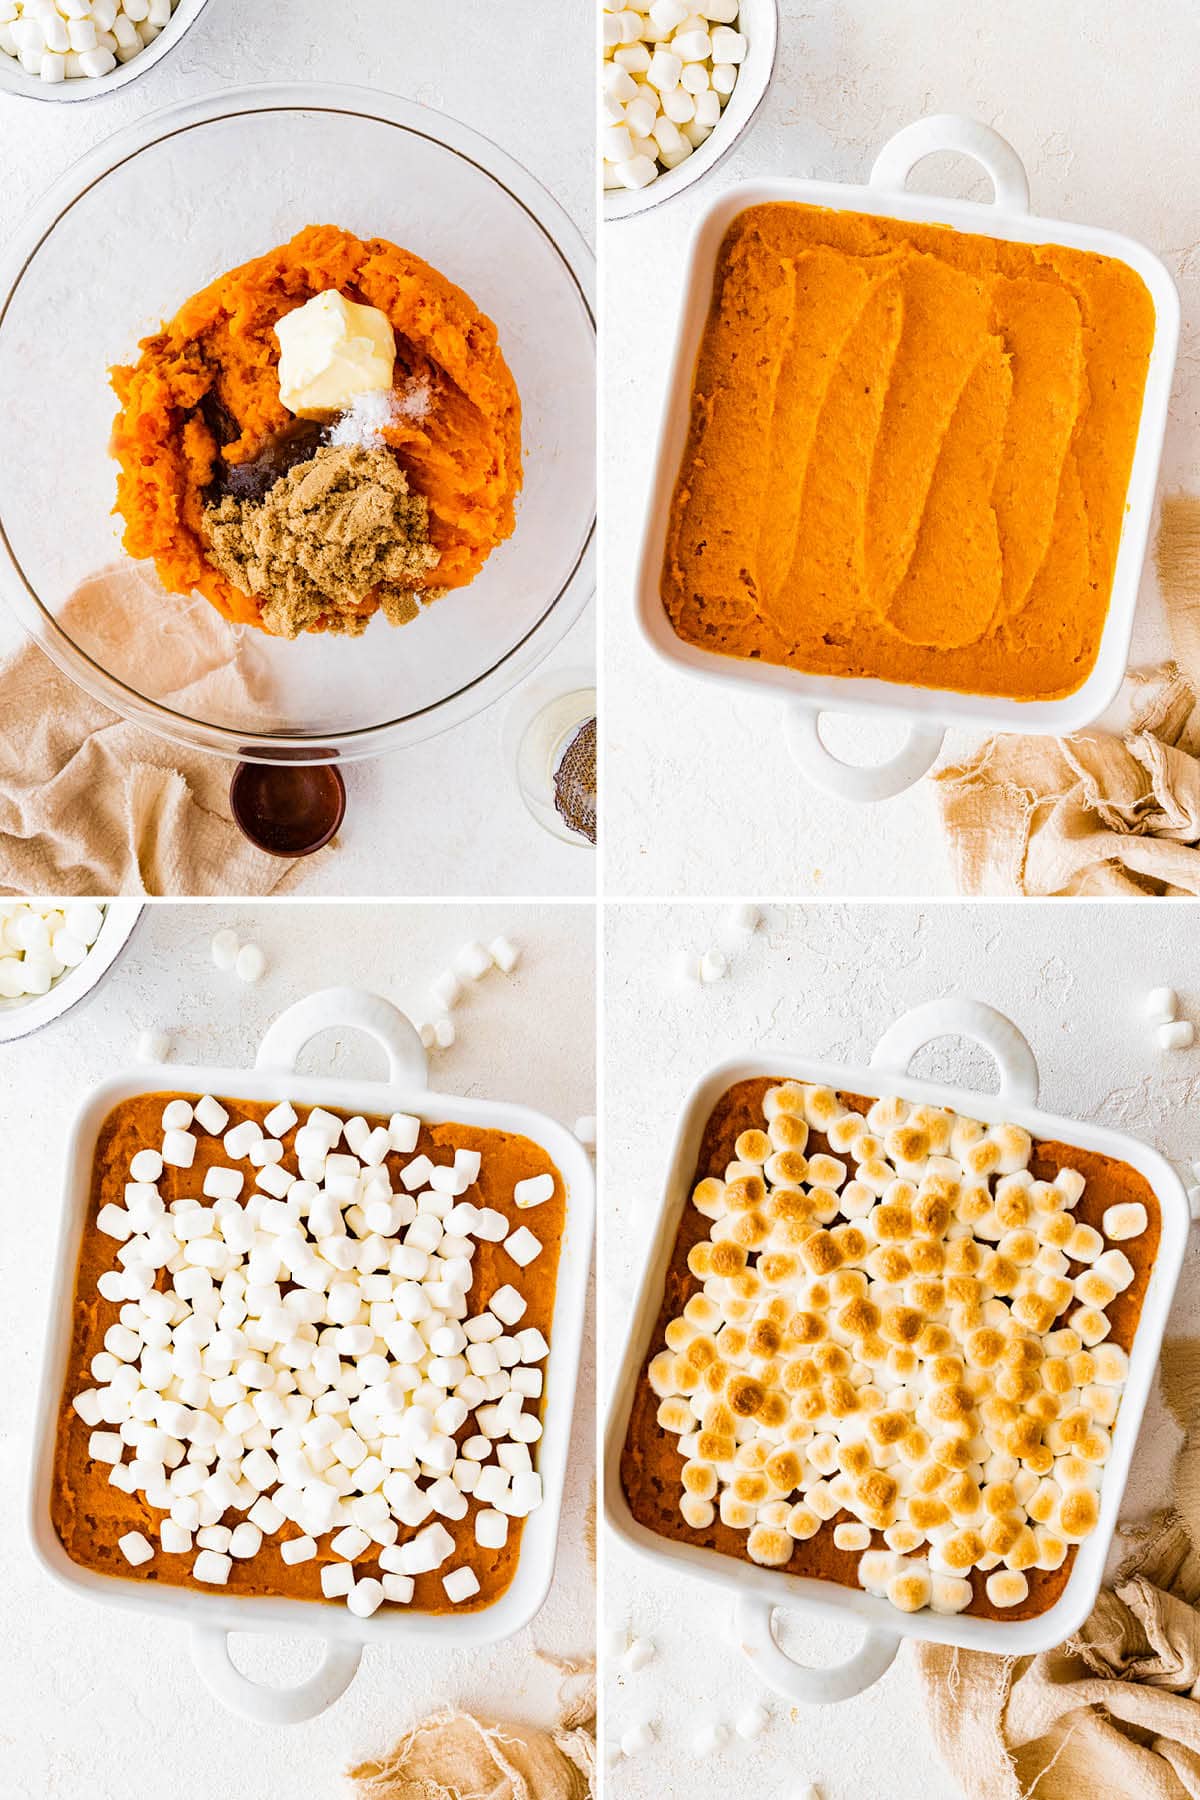 Four photos showing the steps to make Classic Sweet Potato Casserole: mixing together mashed sweet potato, butter, sugar, vanilla, adding to a dish, topping with marshmallows and baking.